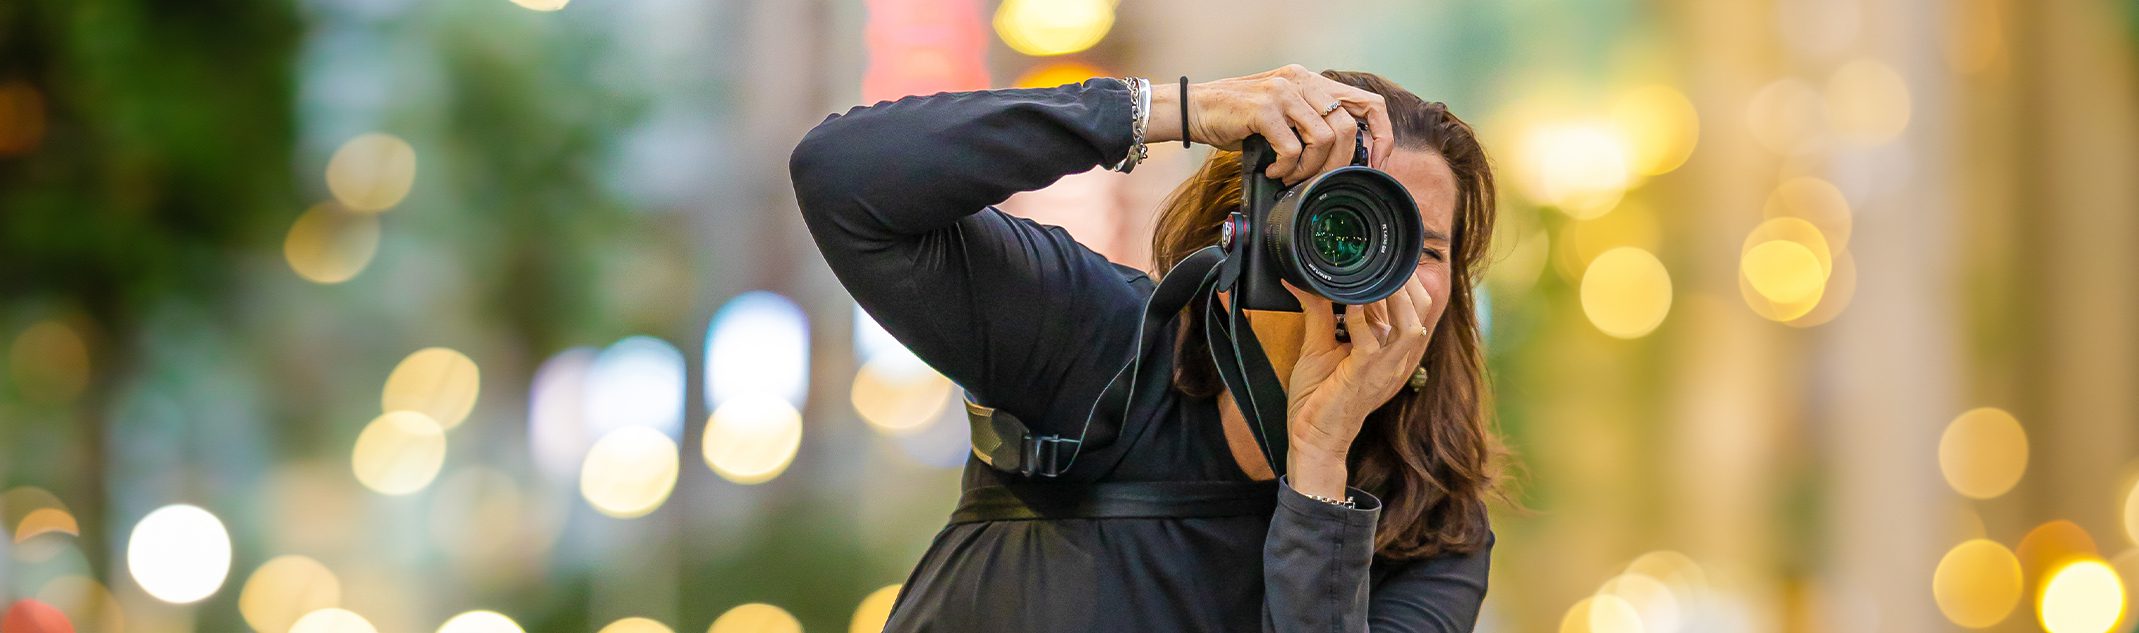 photographer Georgie Greene taking a photograph in a Sydney street with bokeh city lights behind her